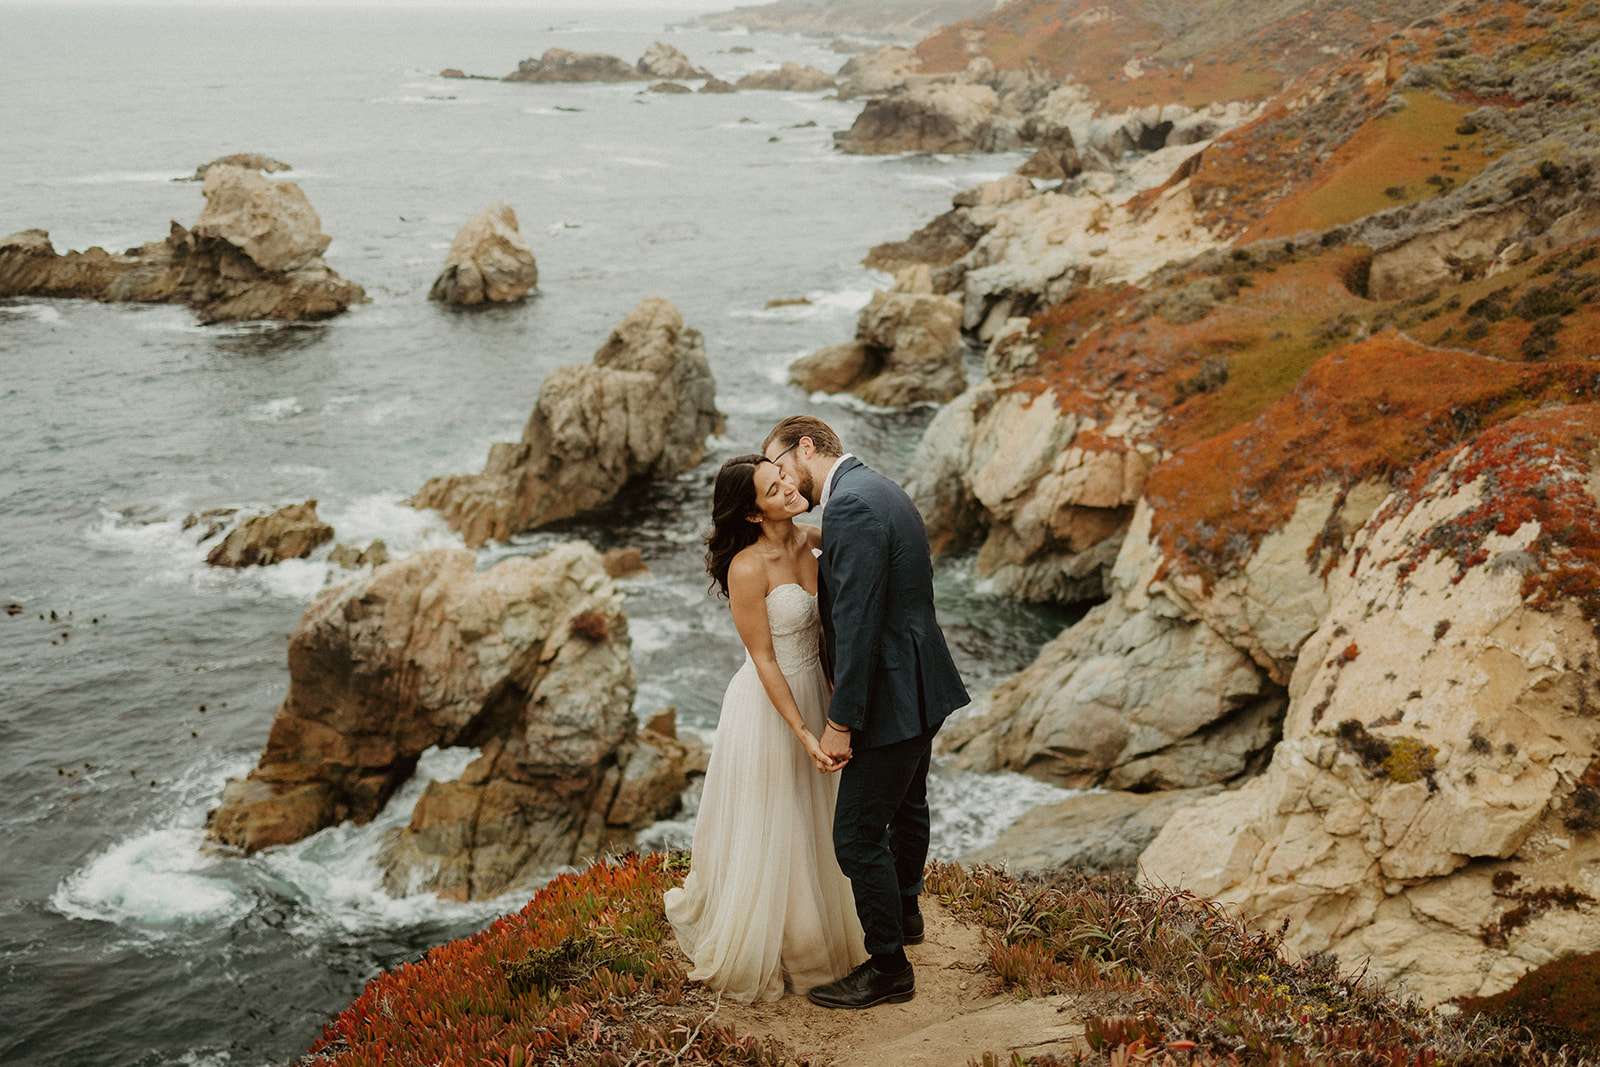 the groom kissing the bride's cheek at their foggy elopement in Big Sur